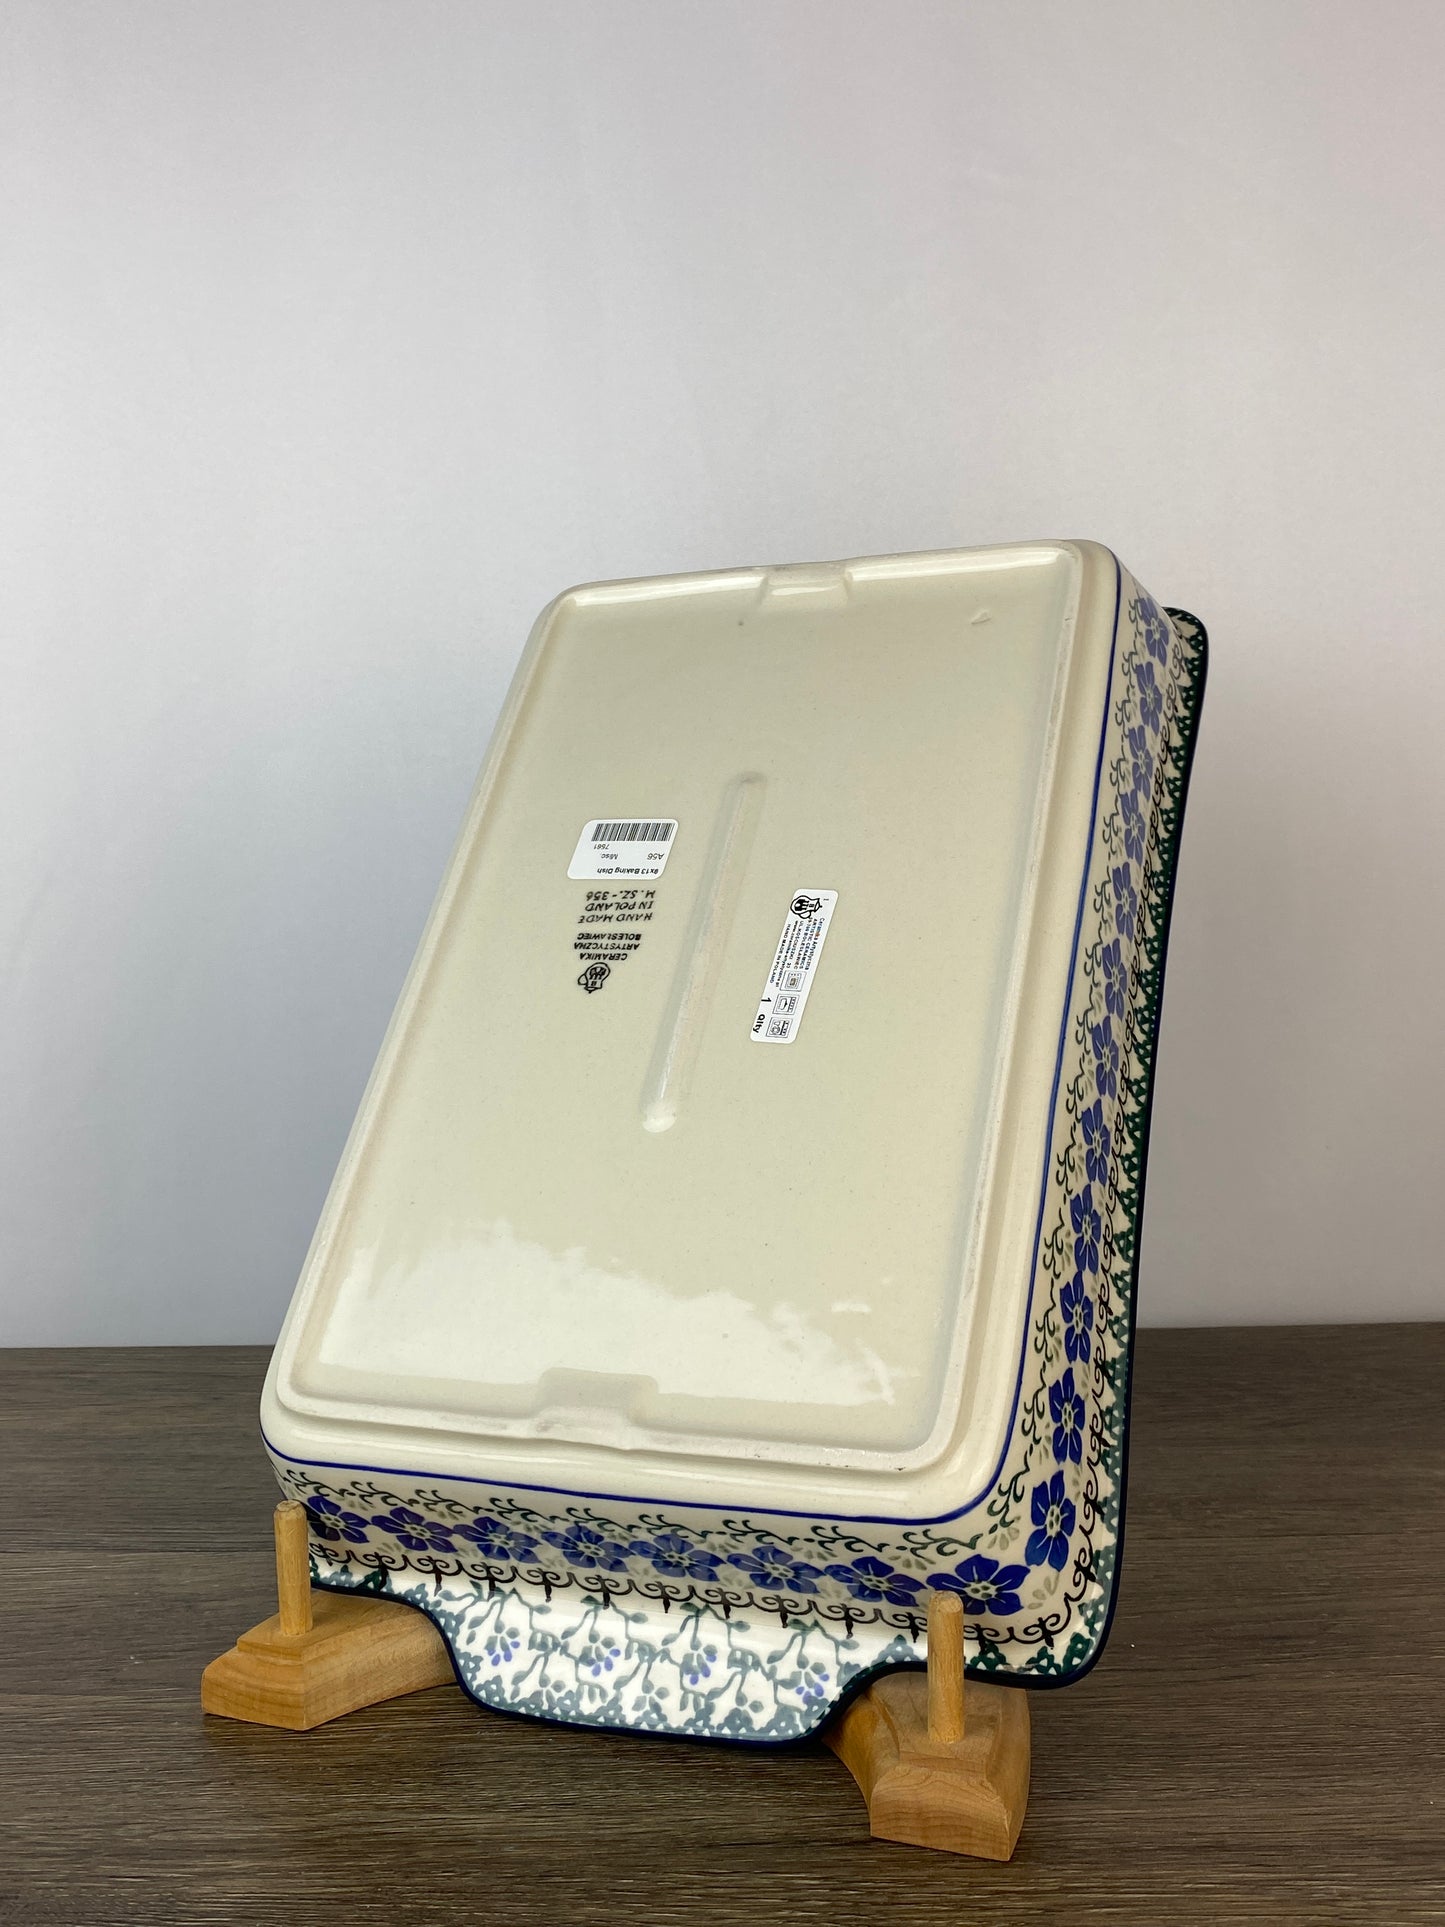 Large Rectangular Baker with Handles - Shape A56 - Pattern 1073